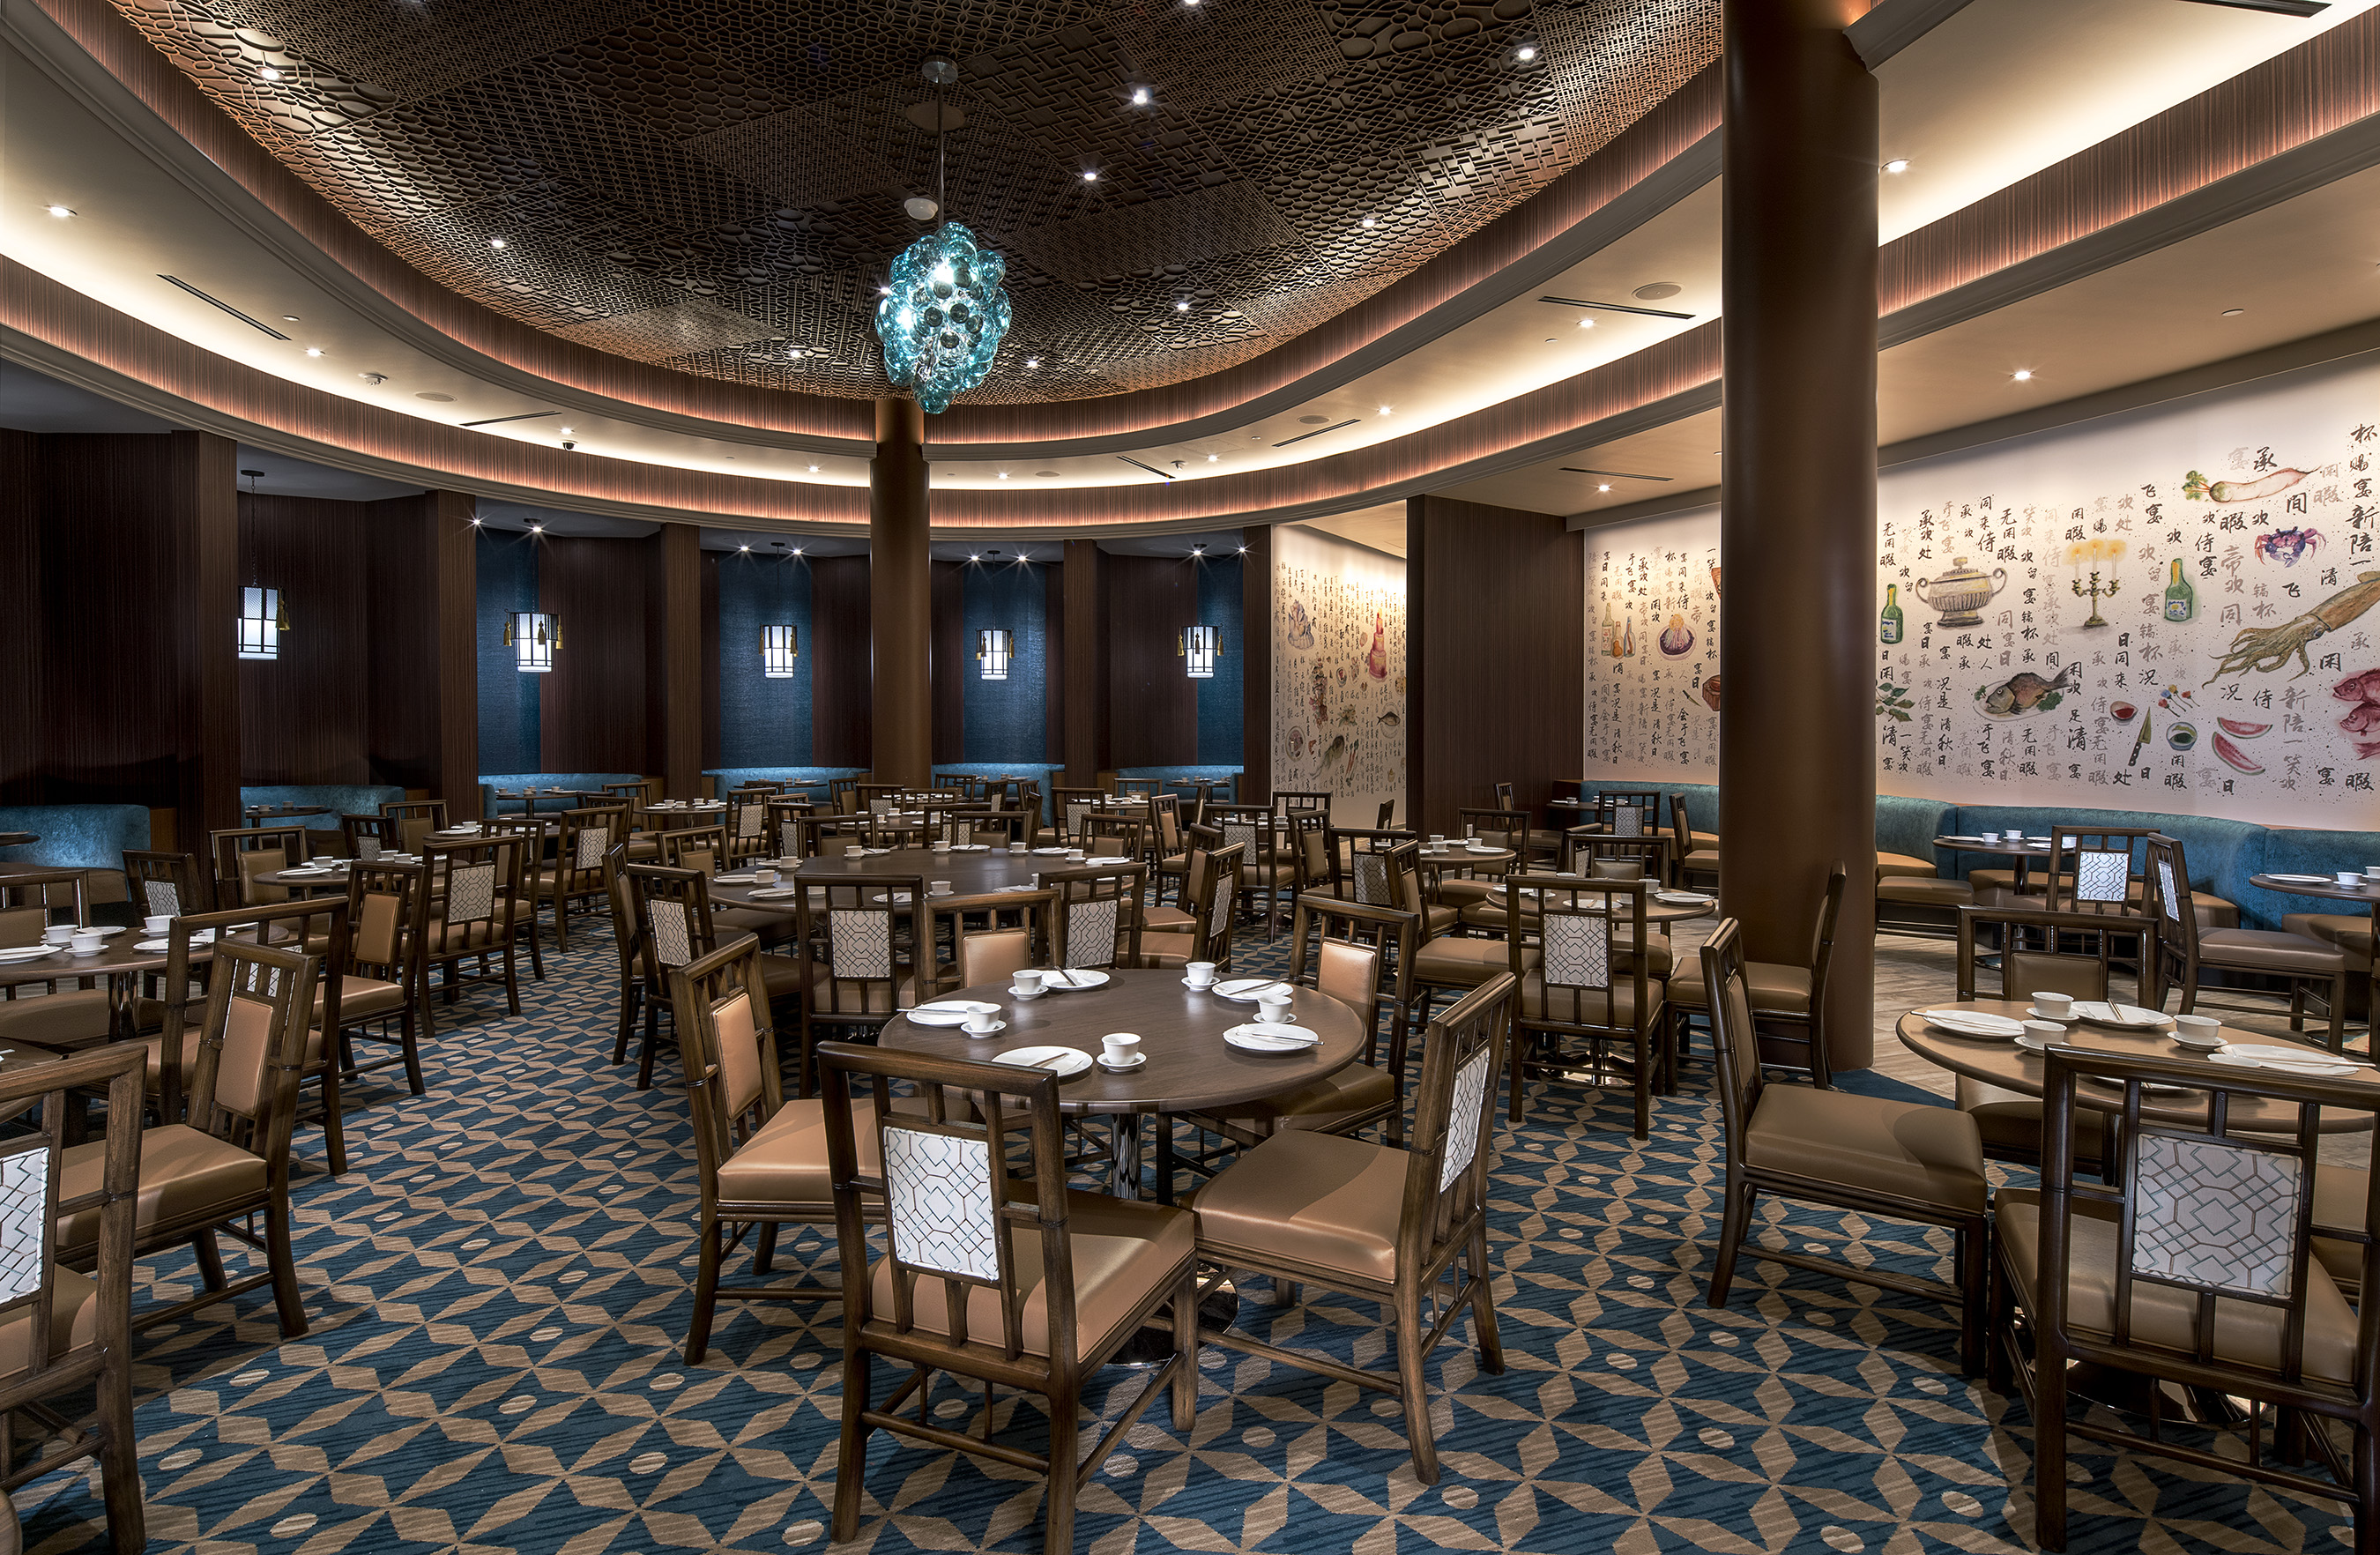 Pearl Ocean will serve Lucky Dragon Hotel & Casino guests unique fresh seafood and the finest dim sum in Las Vegas. // Credit: Larry Hanna, Courtesy: Lucky Dragon Hotel & Casino